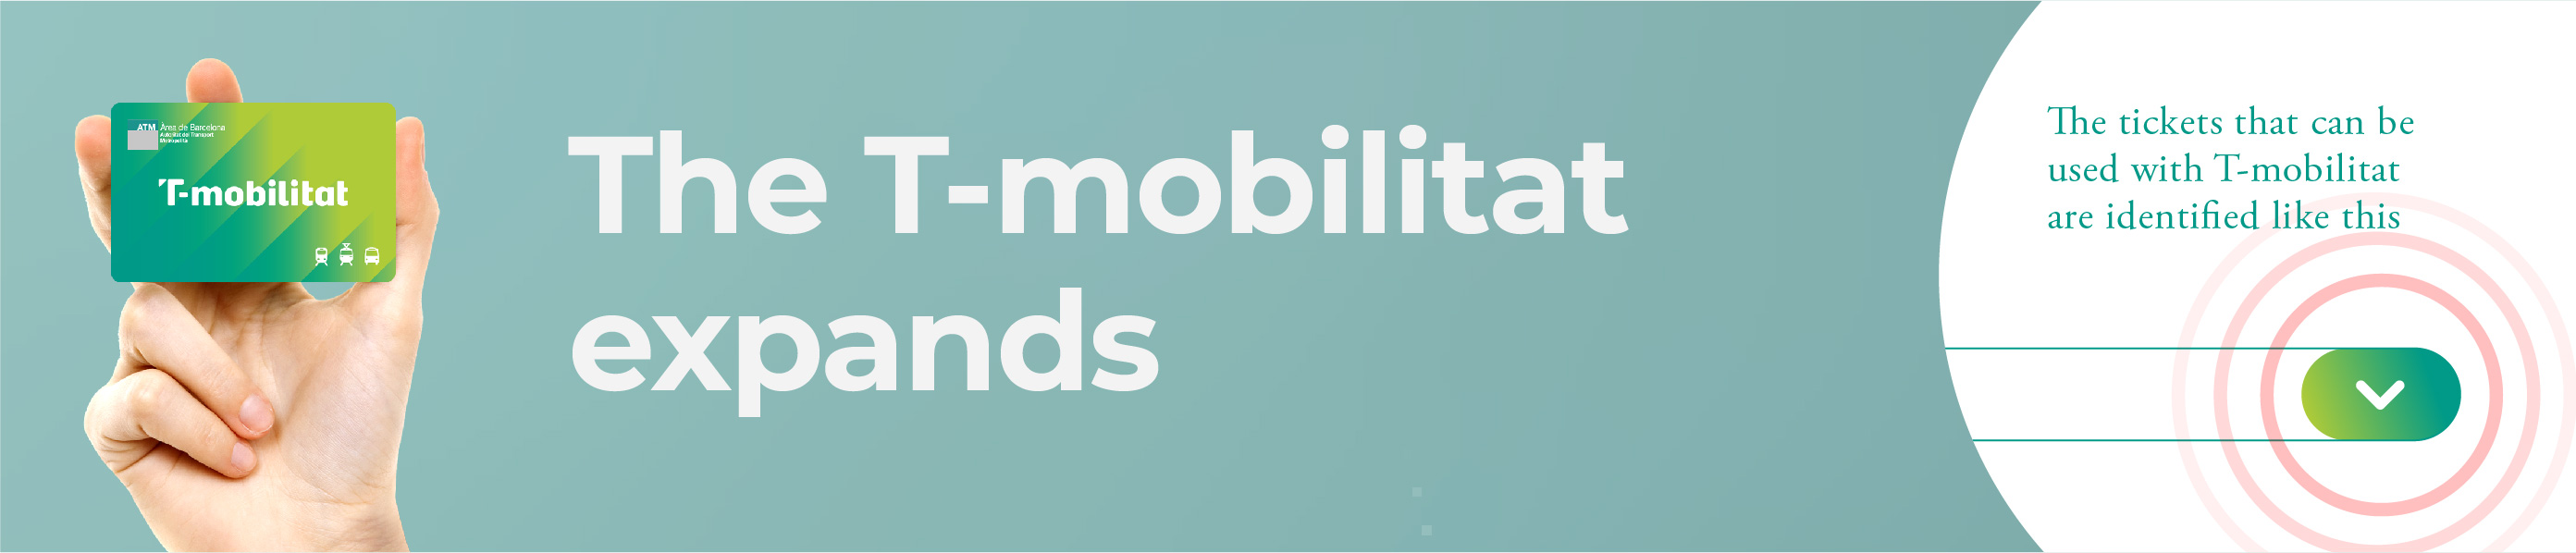 Adult holding a T-mobilitat transport title. All information about the titles available with T-mobilitat can be found in the drop-down blocks represented with a gradient of the same color as the T-mobilitat website.